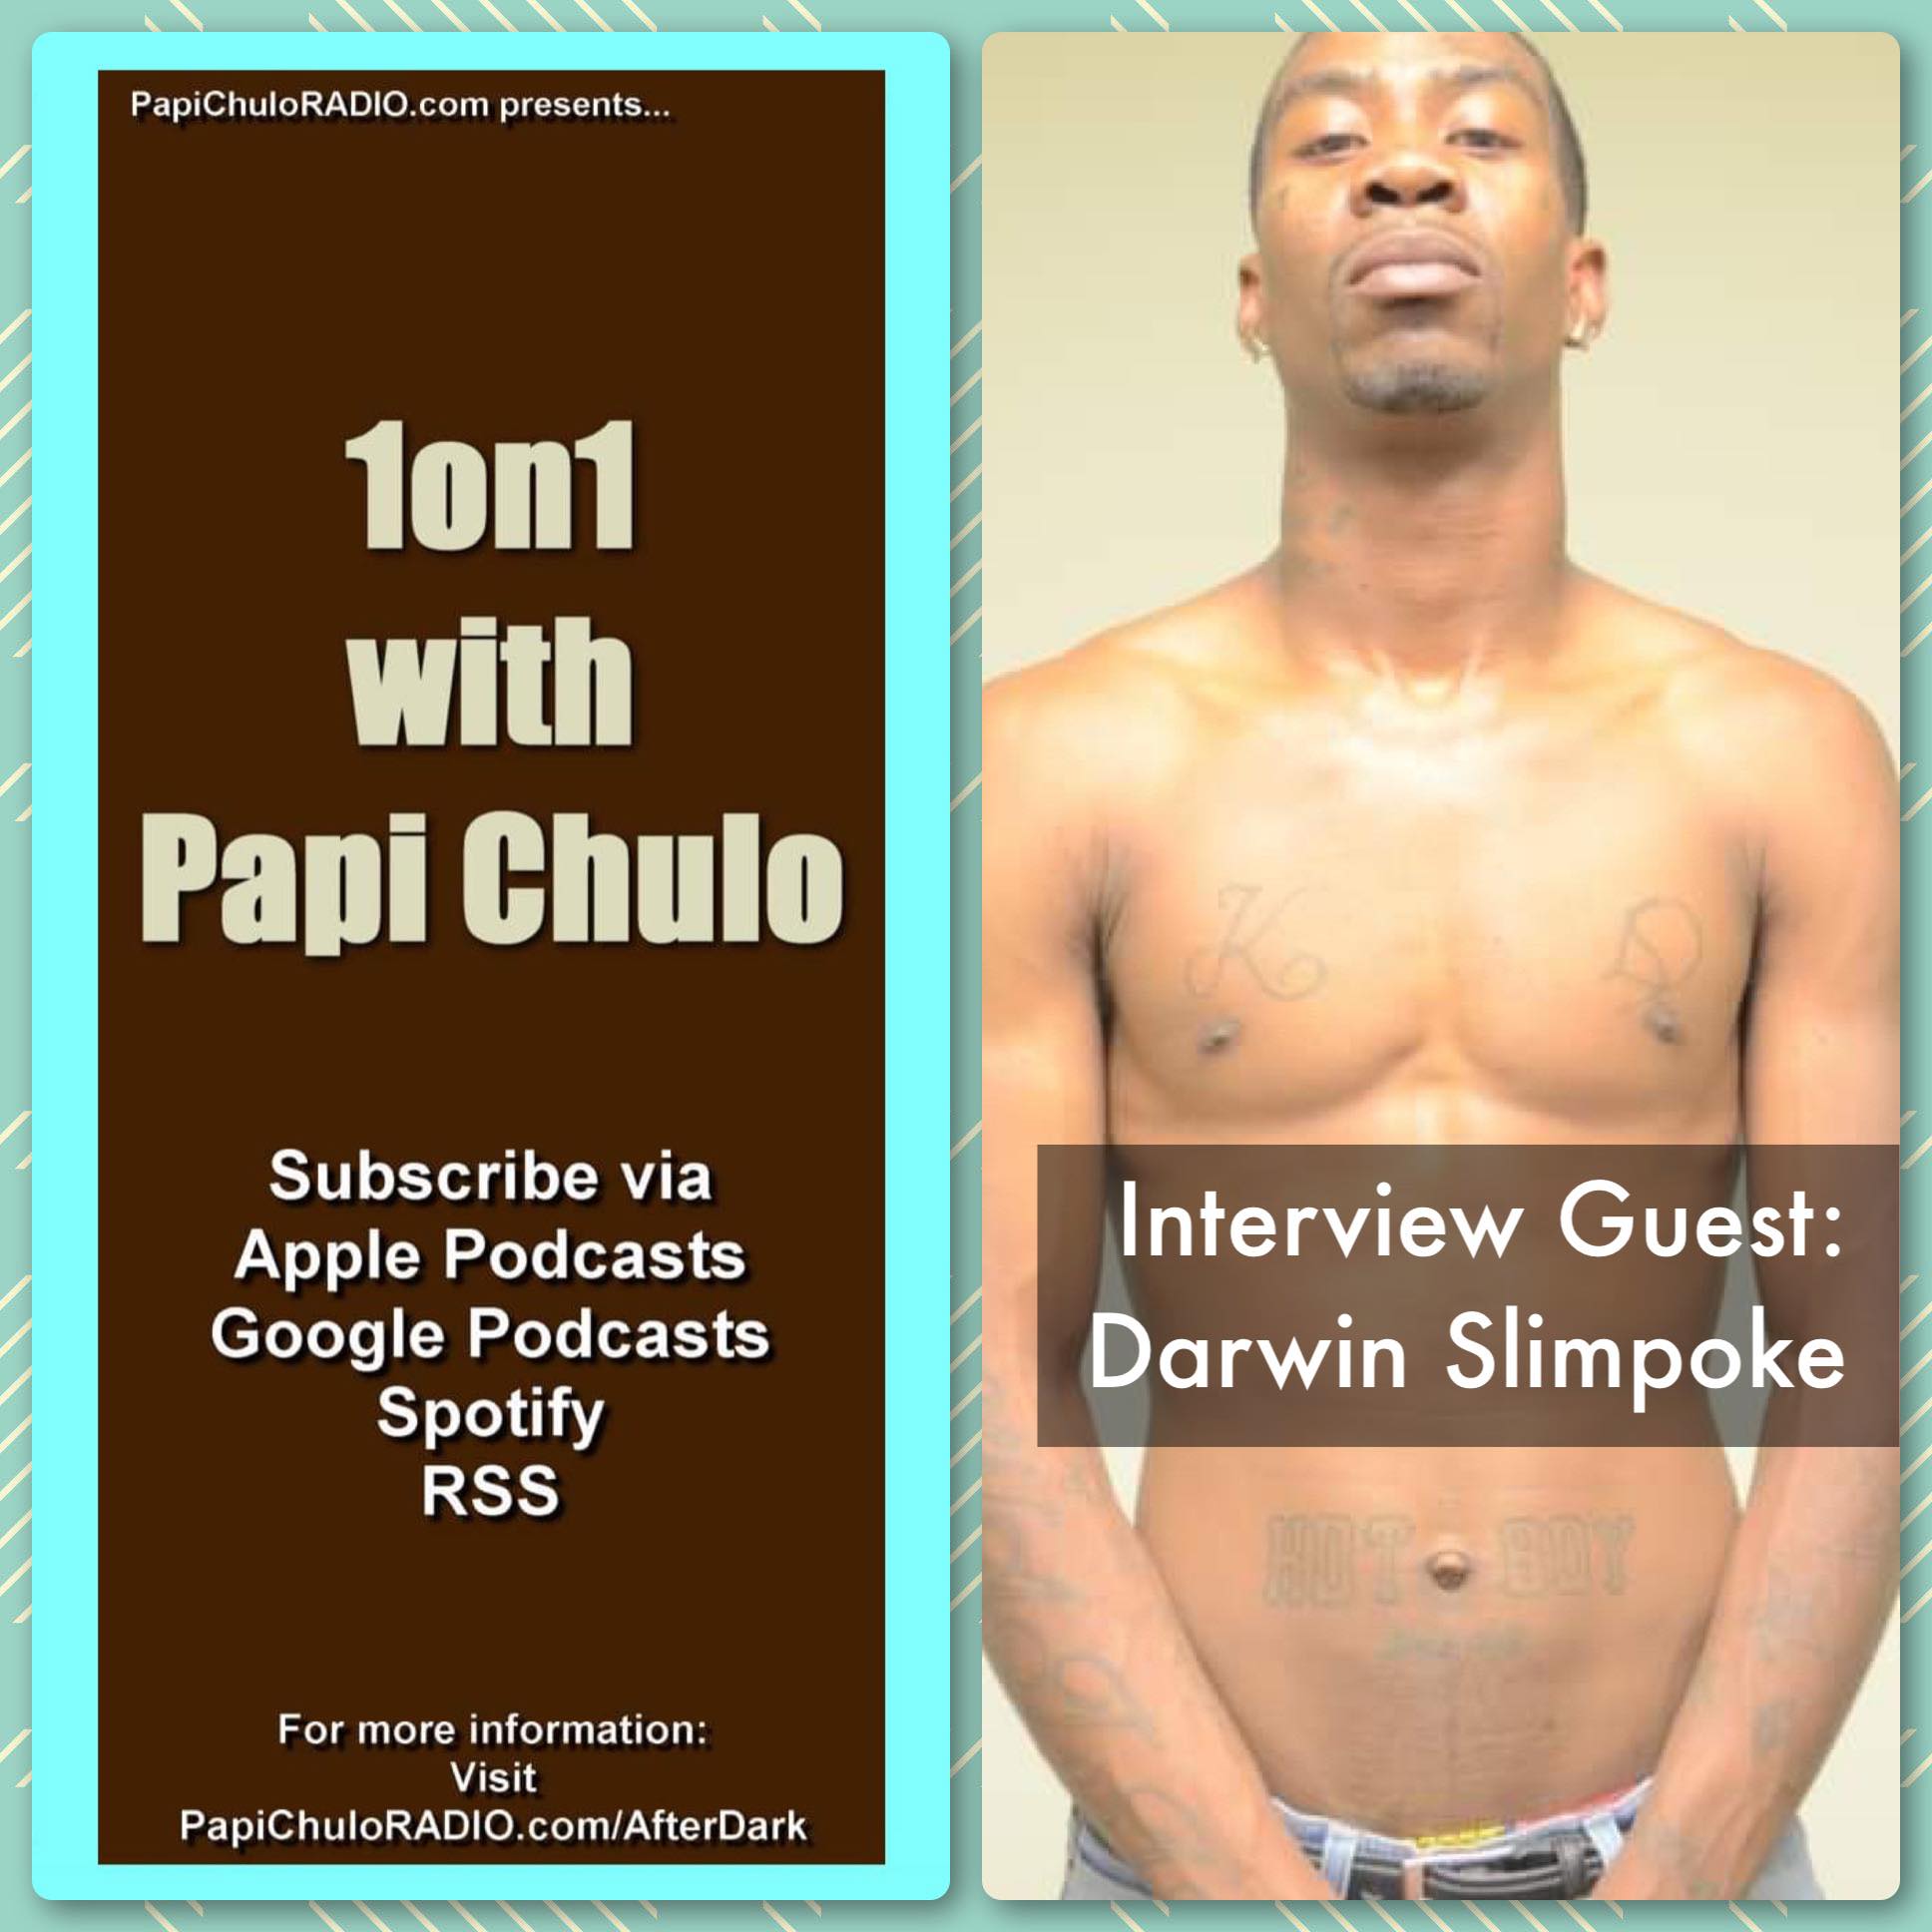 1on1 with Papi Chulo – Special Guest: DARWIN SLIMPOKE [April 15, 2015]